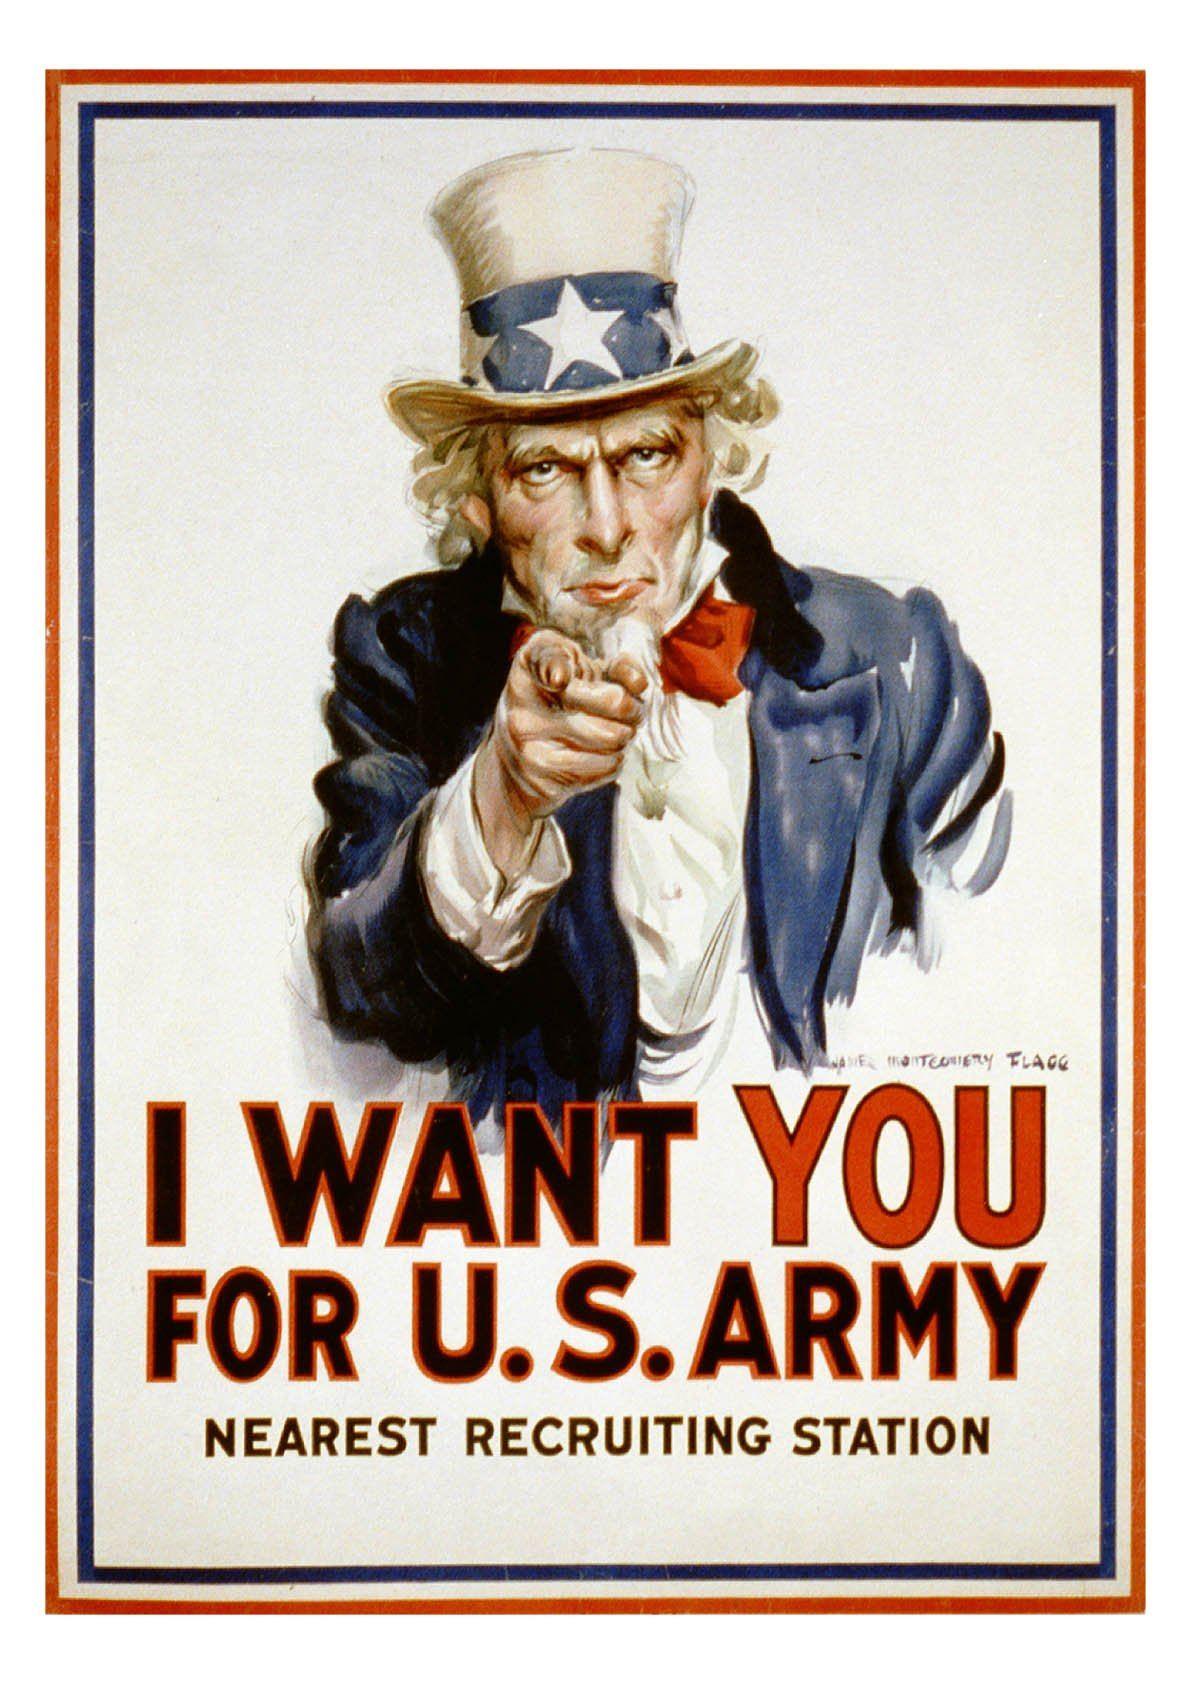 UNCLE SAM POSTER: 'I Want You' Army Recruitment Print - Pimlico Prints